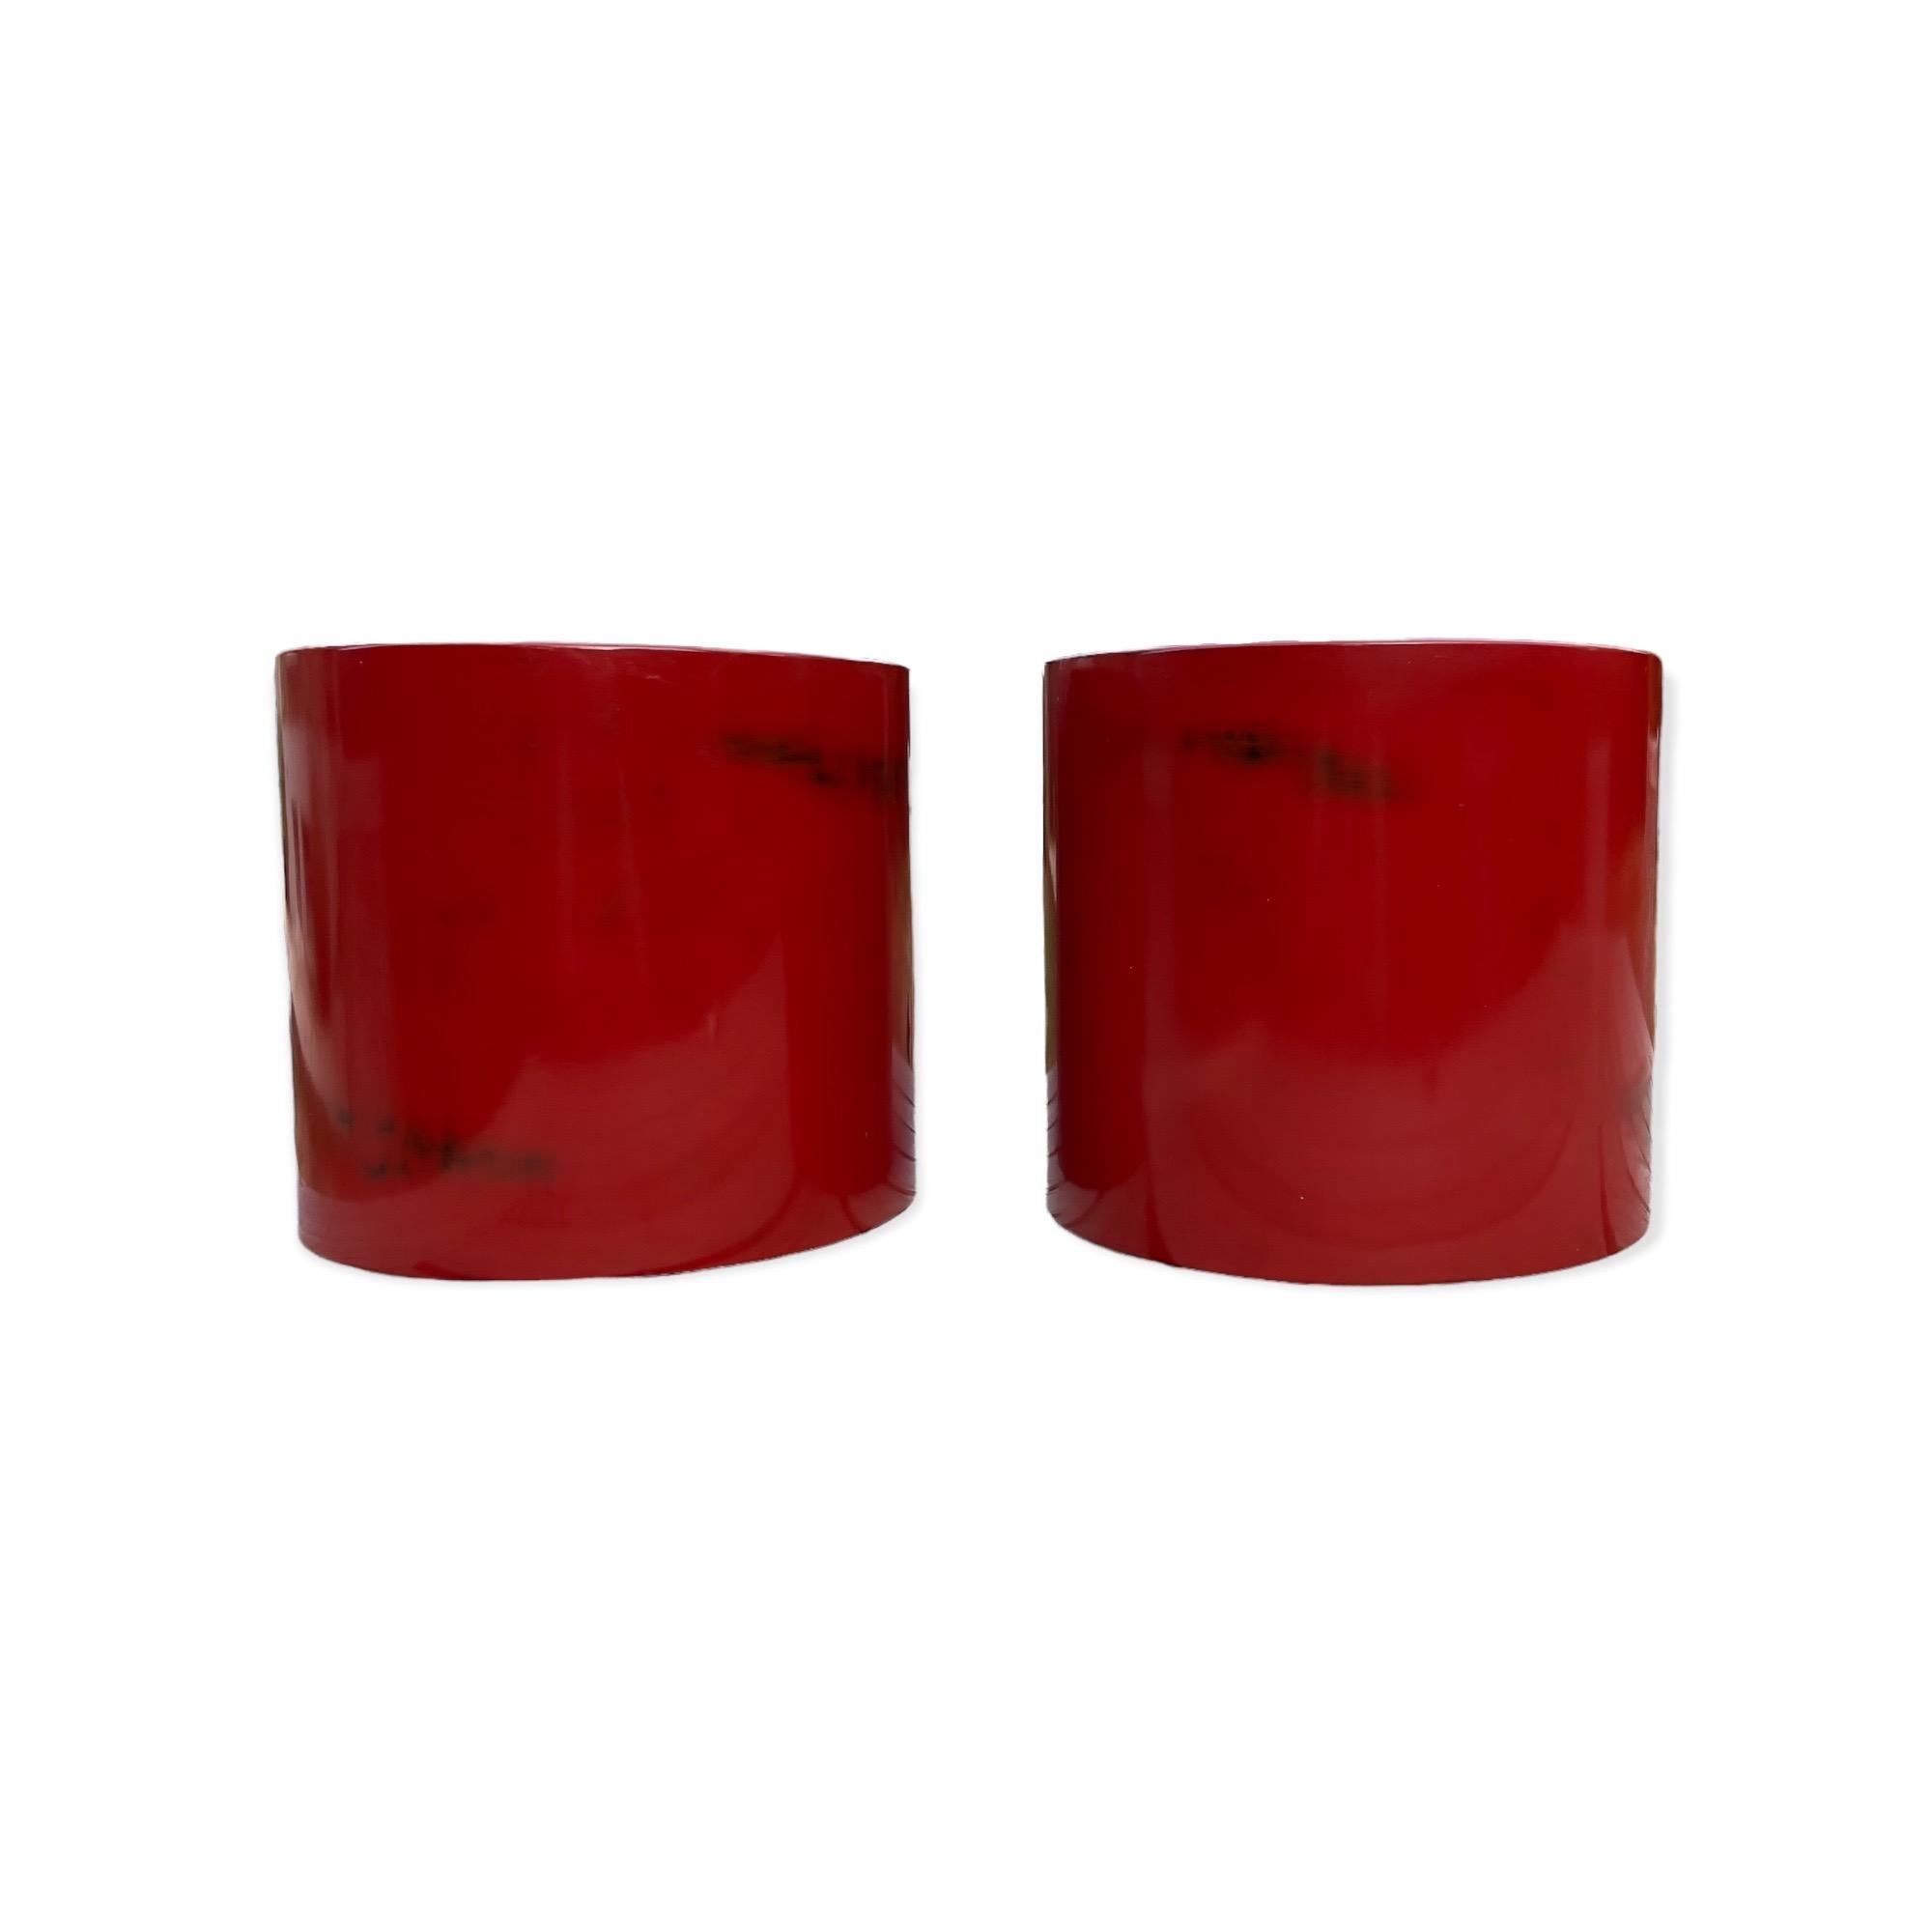 A pair of rare red lacquer (negoro) with shades of black. Very warm and deep color.
The inside containers made of brass, have traces of use as braziers but can be now used as jardinières.
Good condition.